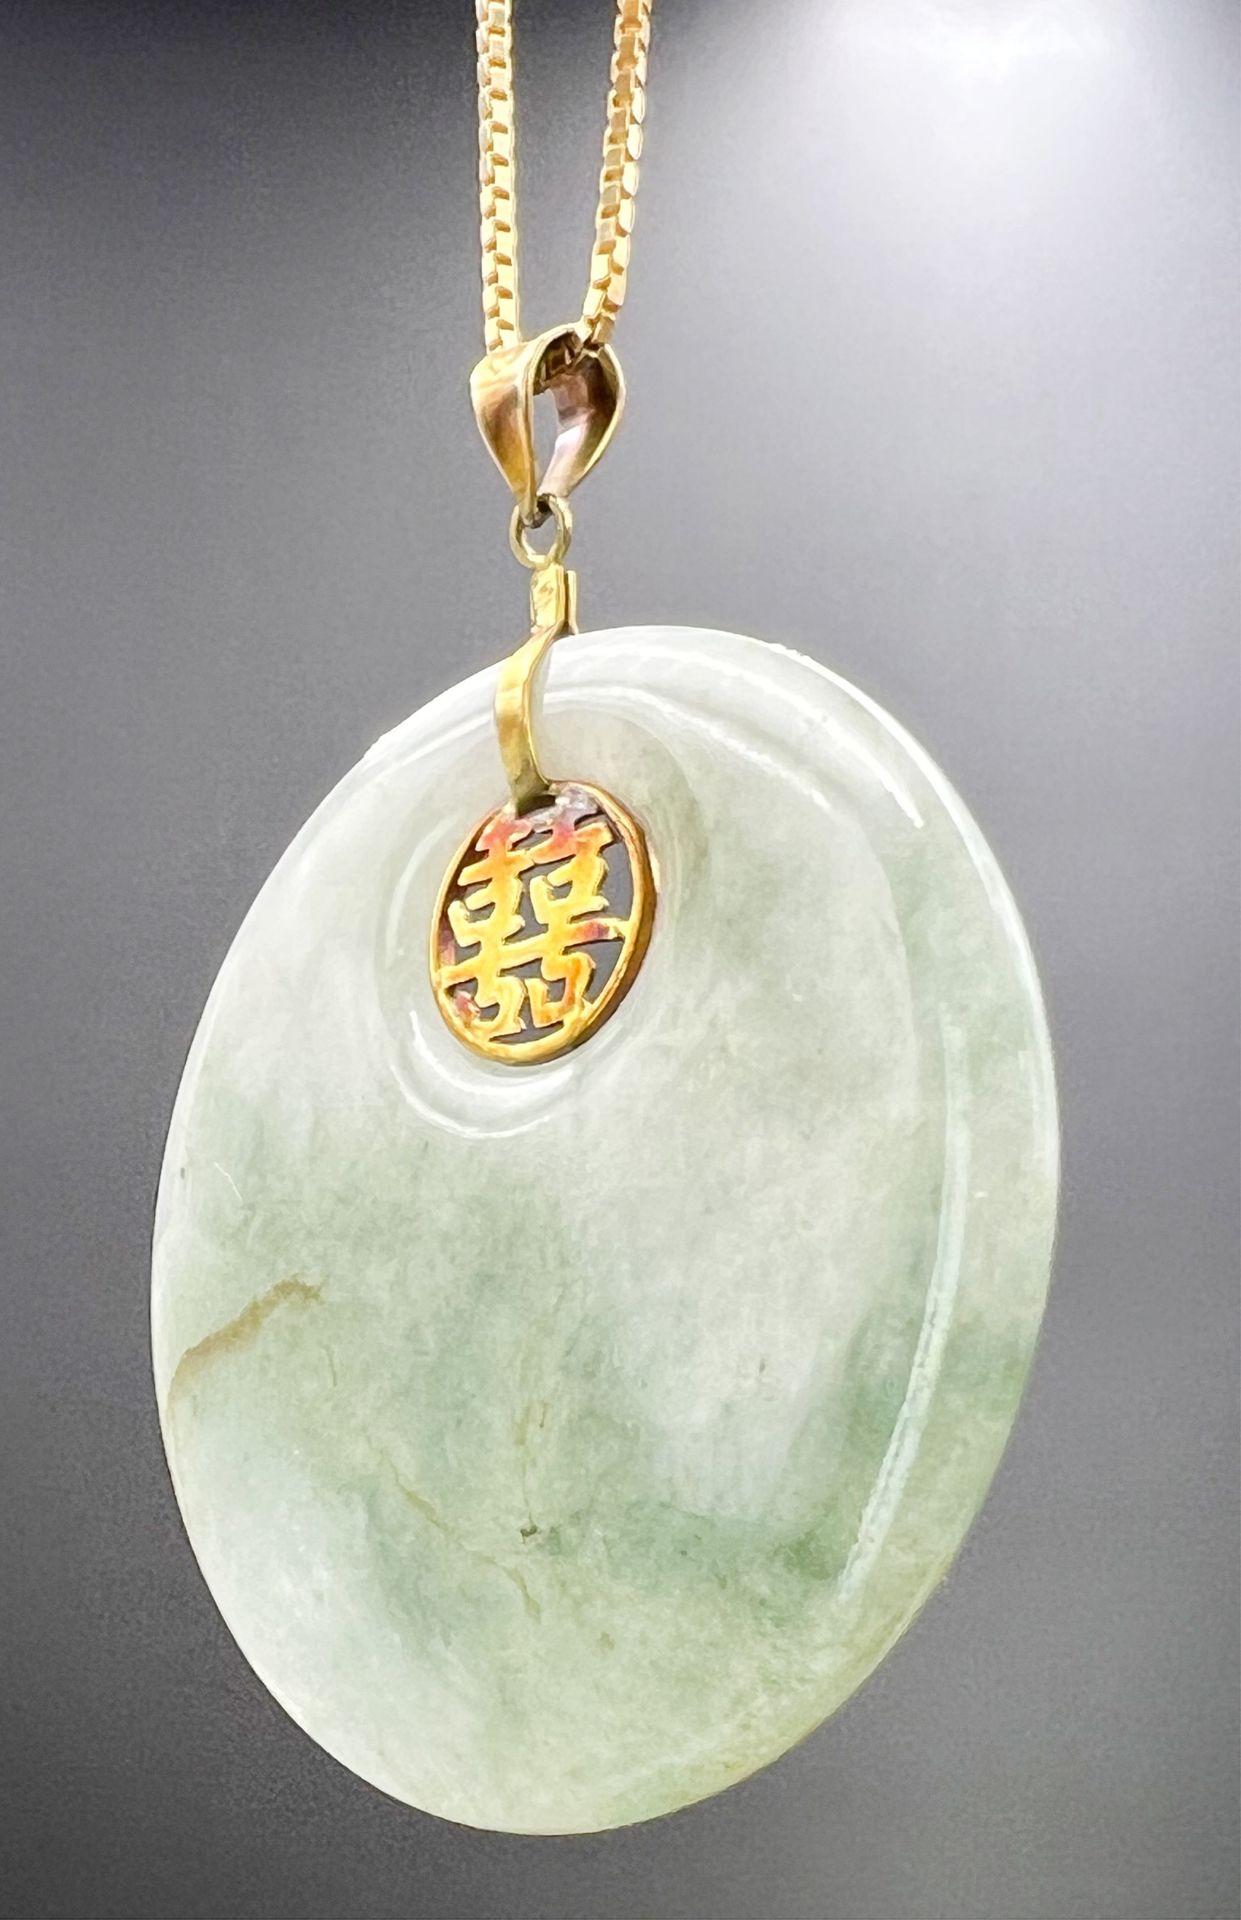 Jade pendant with necklace 750 yellow gold. - Image 11 of 14